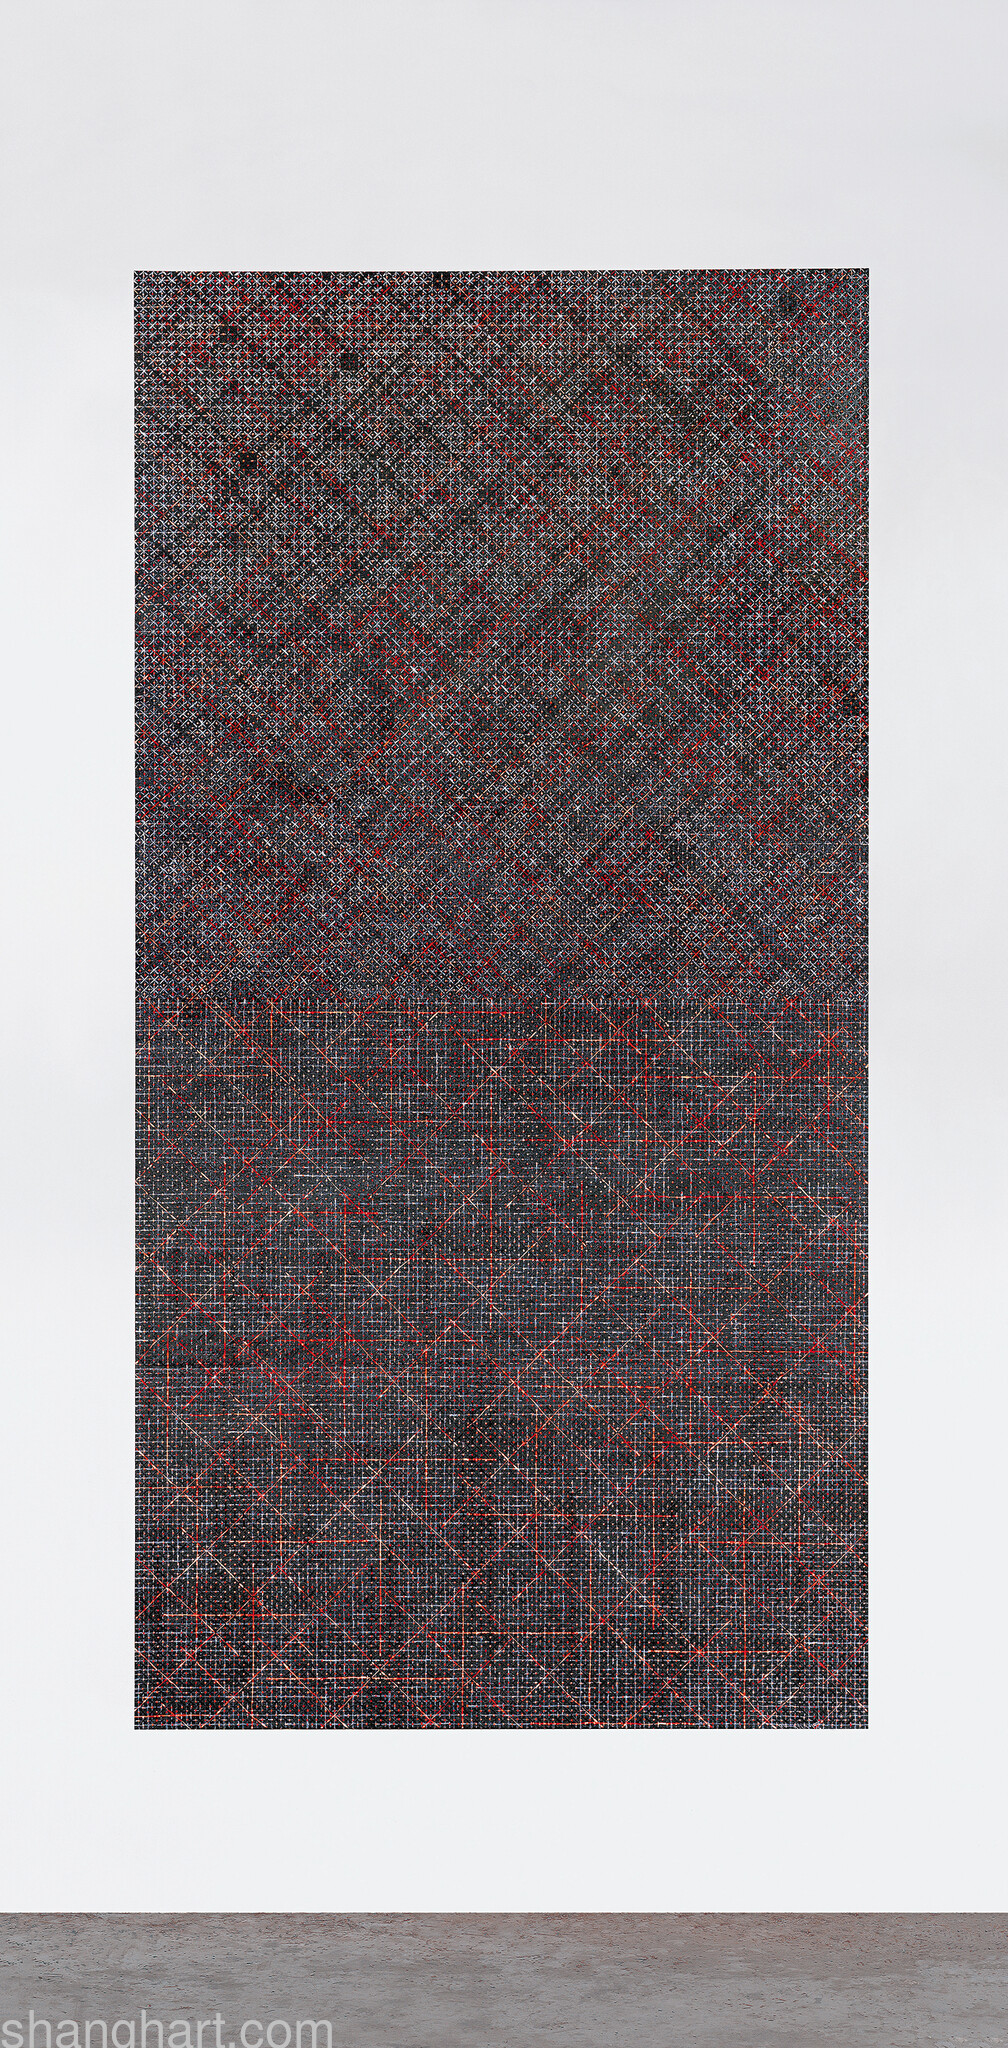 DING Yi, Appearance of Crosses 2015-9, Acrylic on basswood panel with engravings, 480x240cm